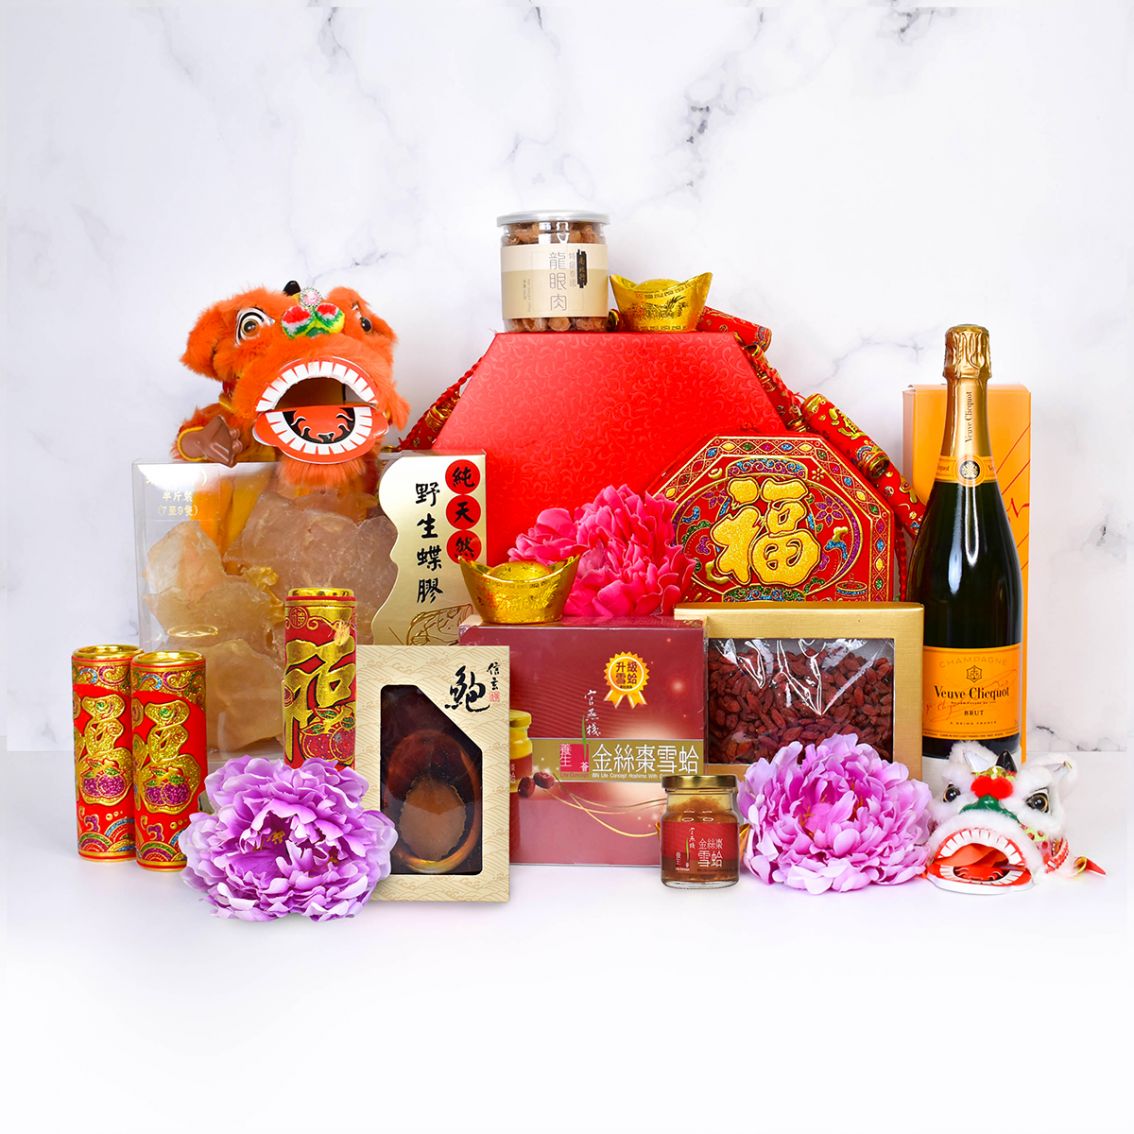 , Lunar New Year Gift Guide